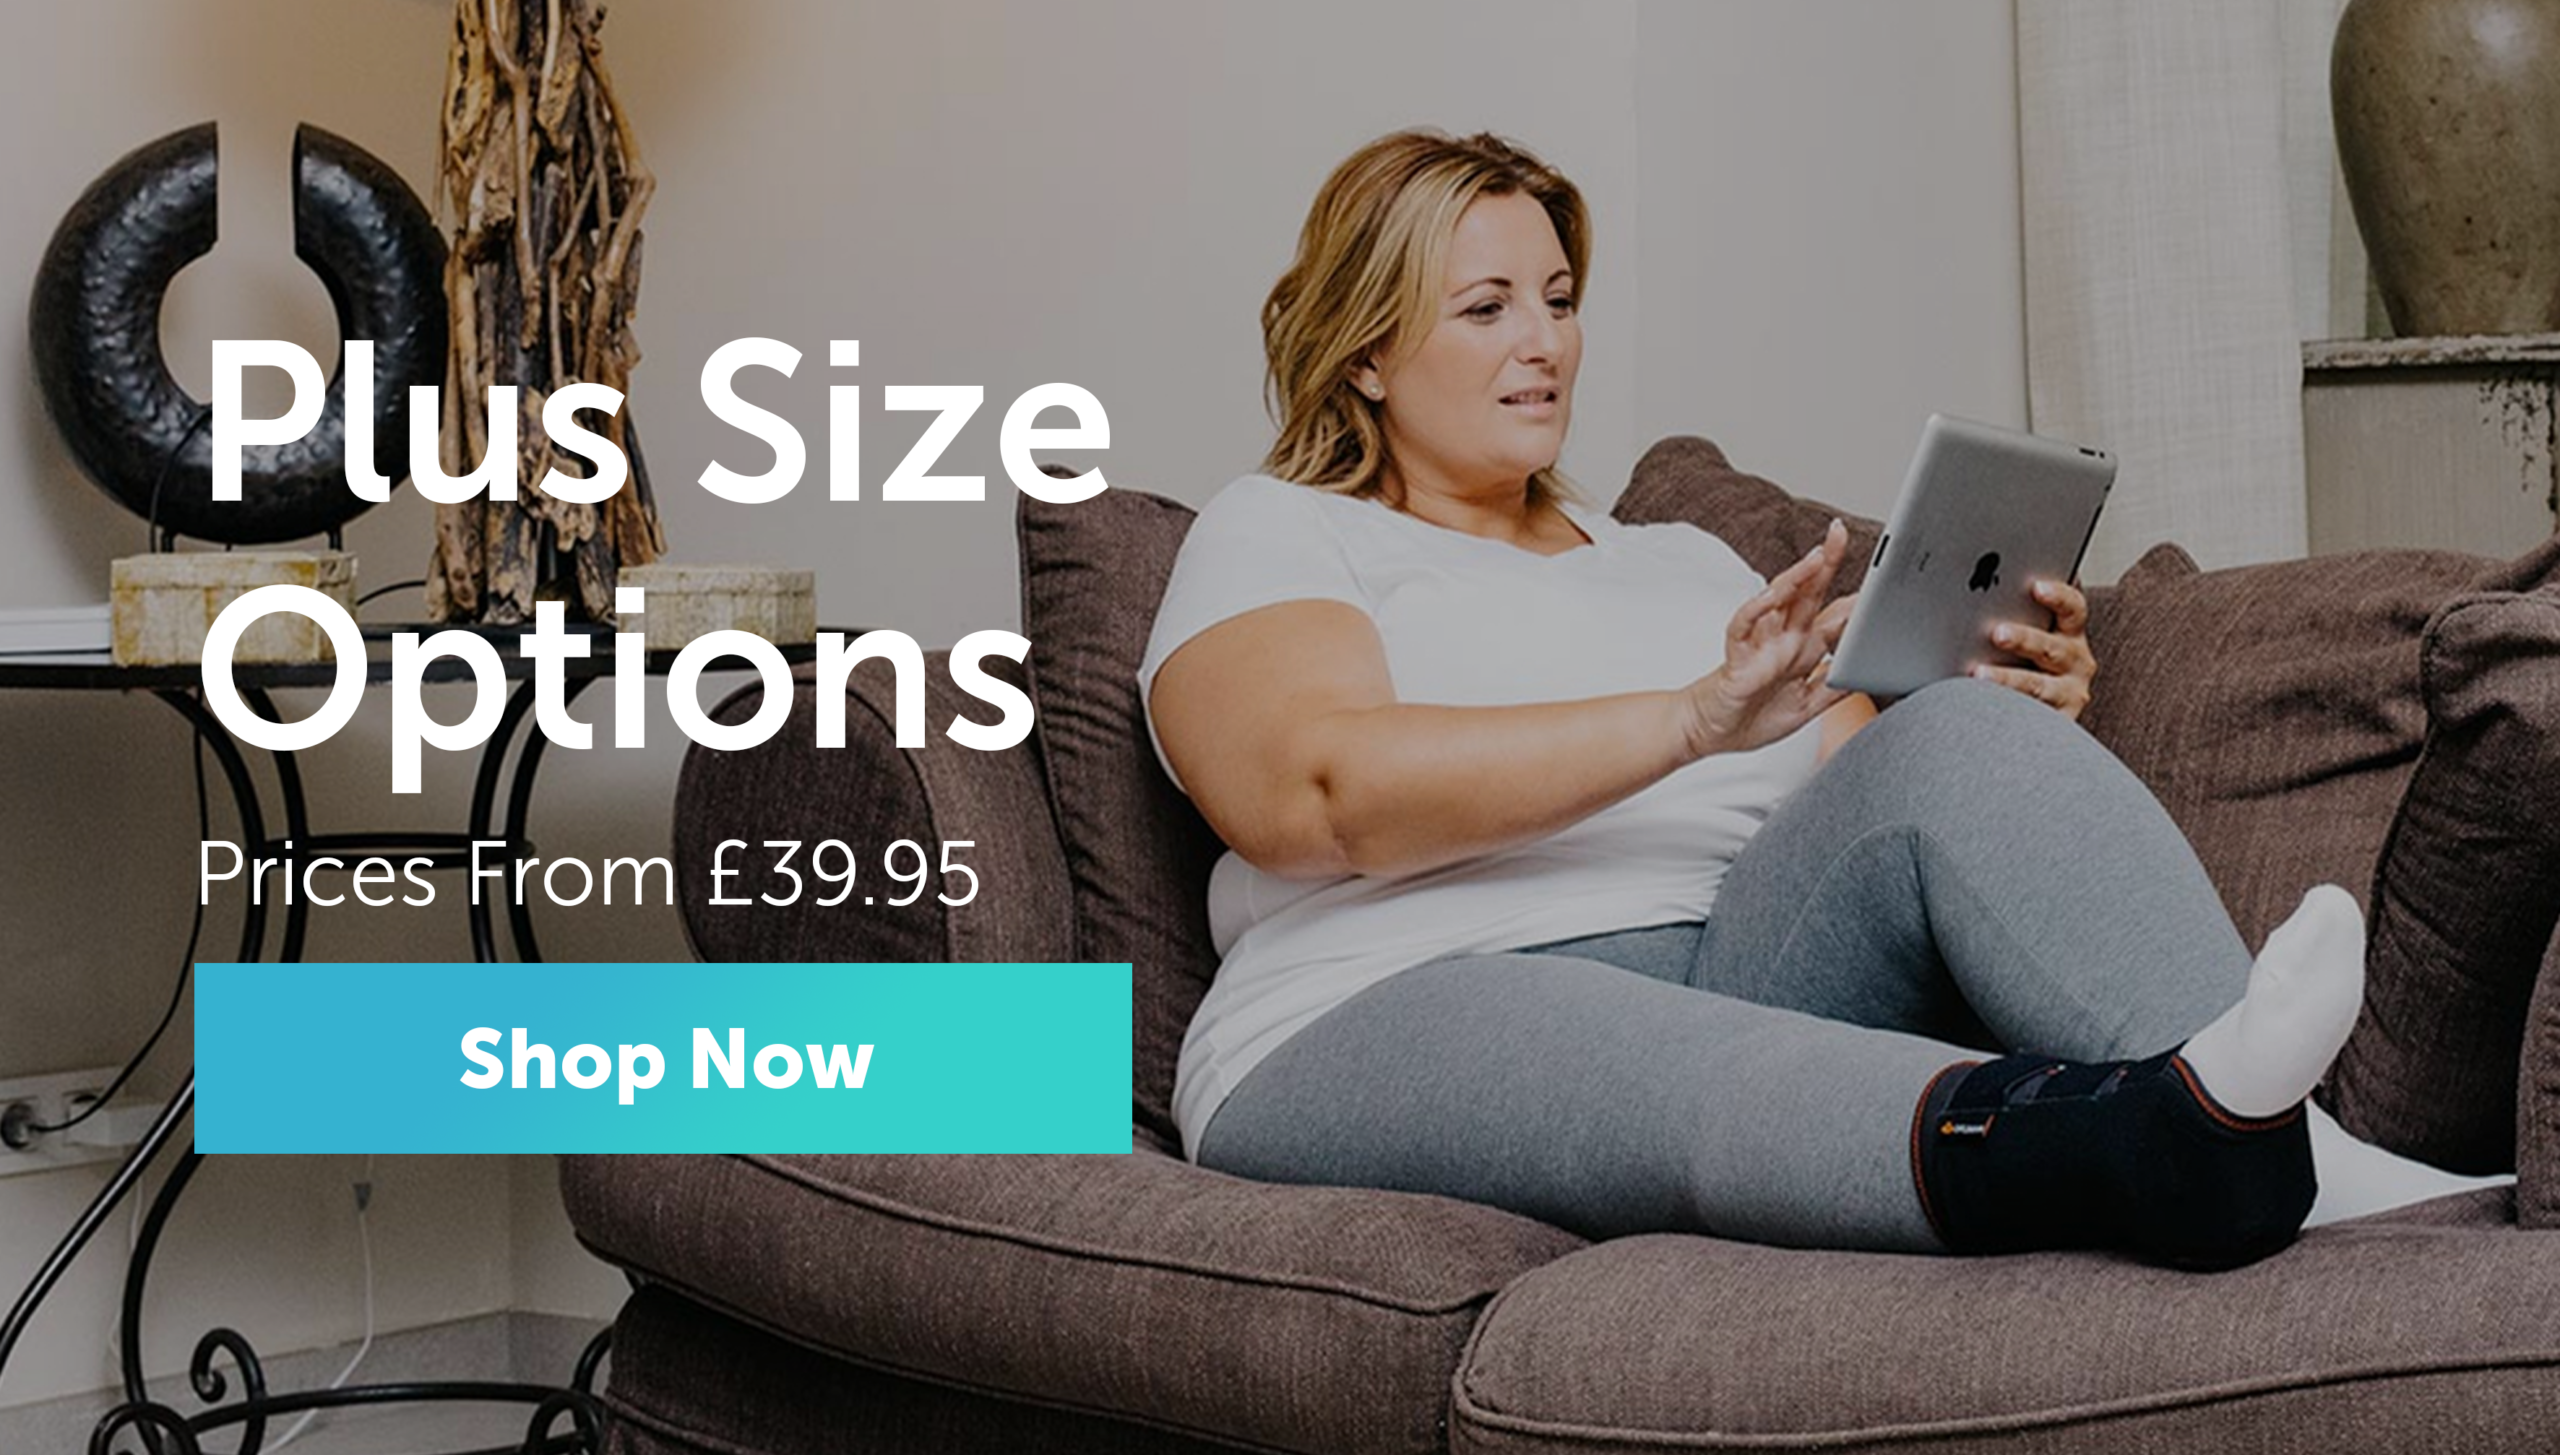 Bariatric Options From £39.95